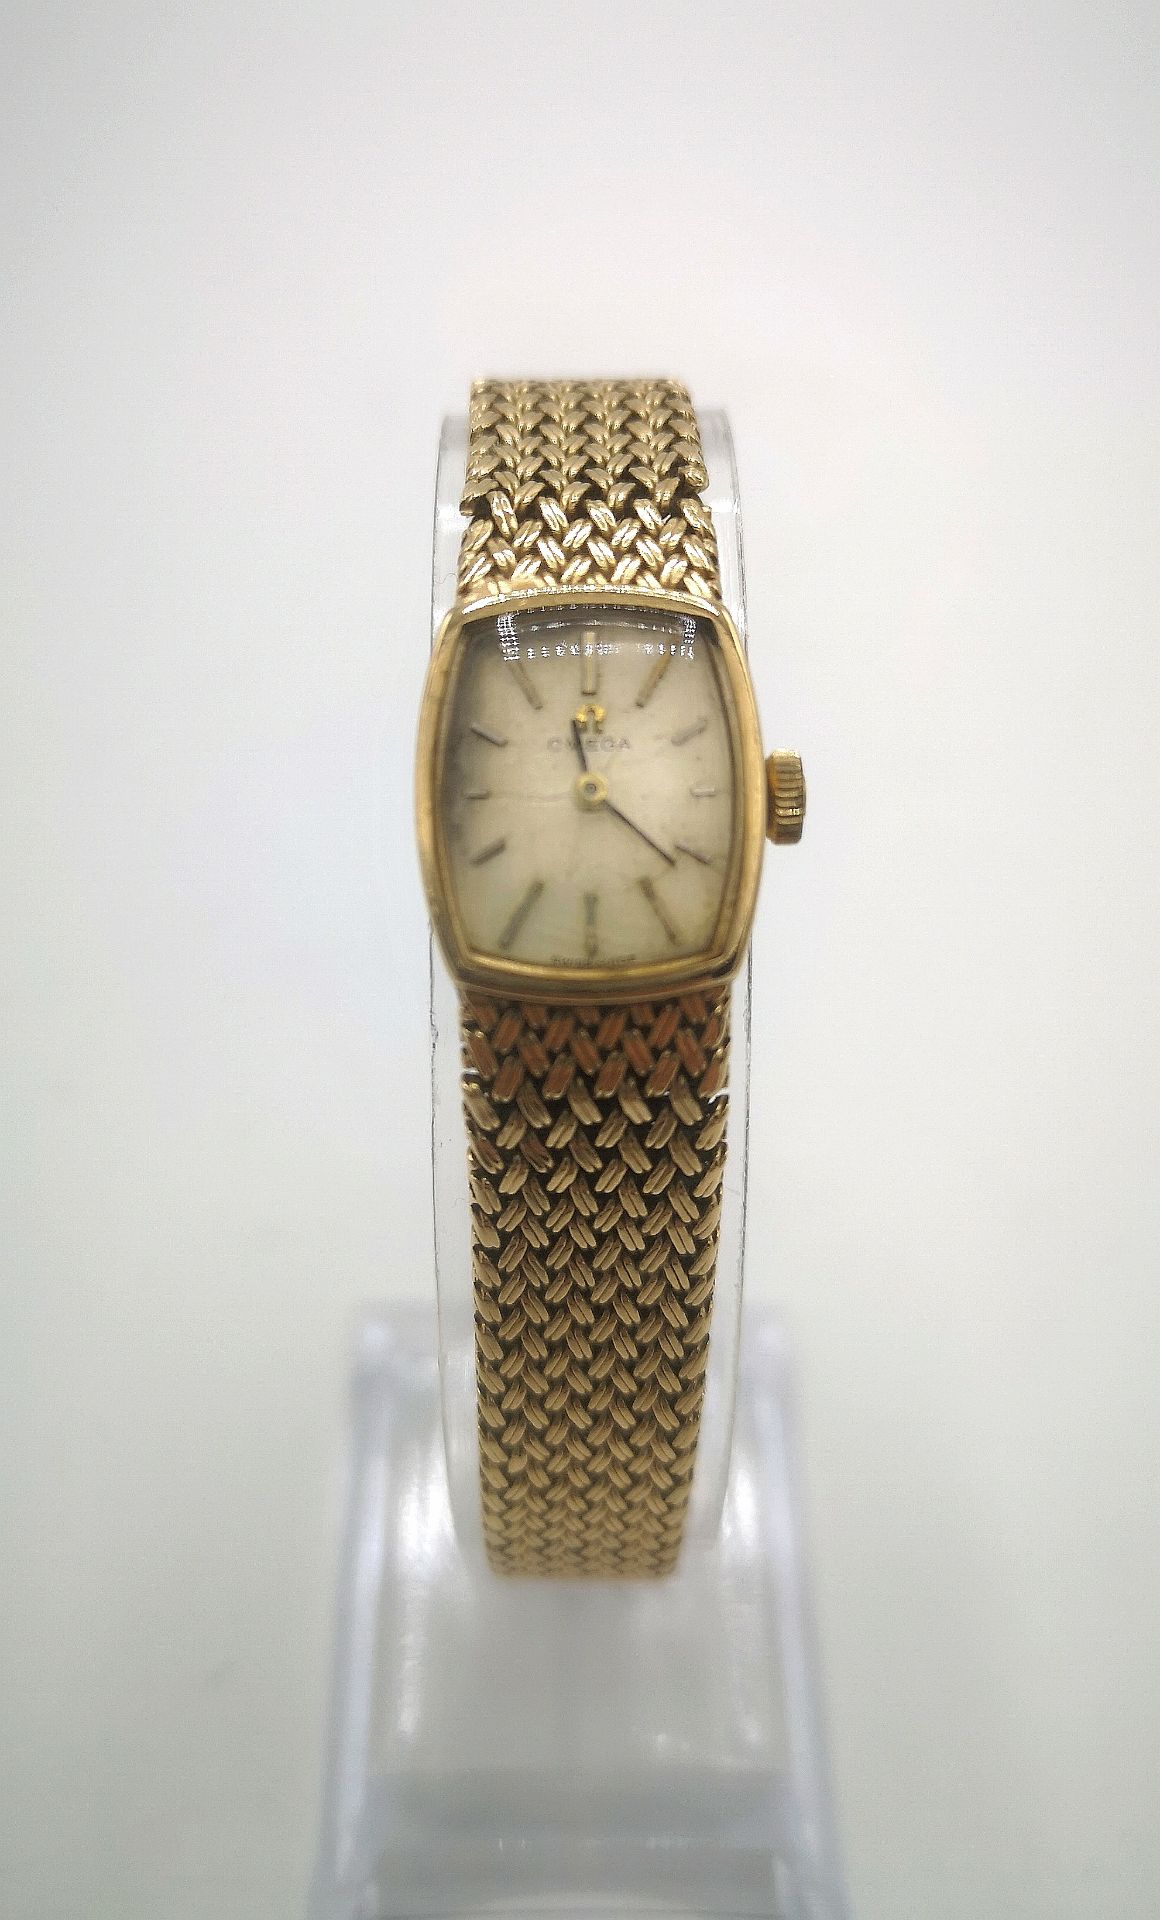 Ladies Omega wristwatch in 9ct gold case - Image 8 of 8